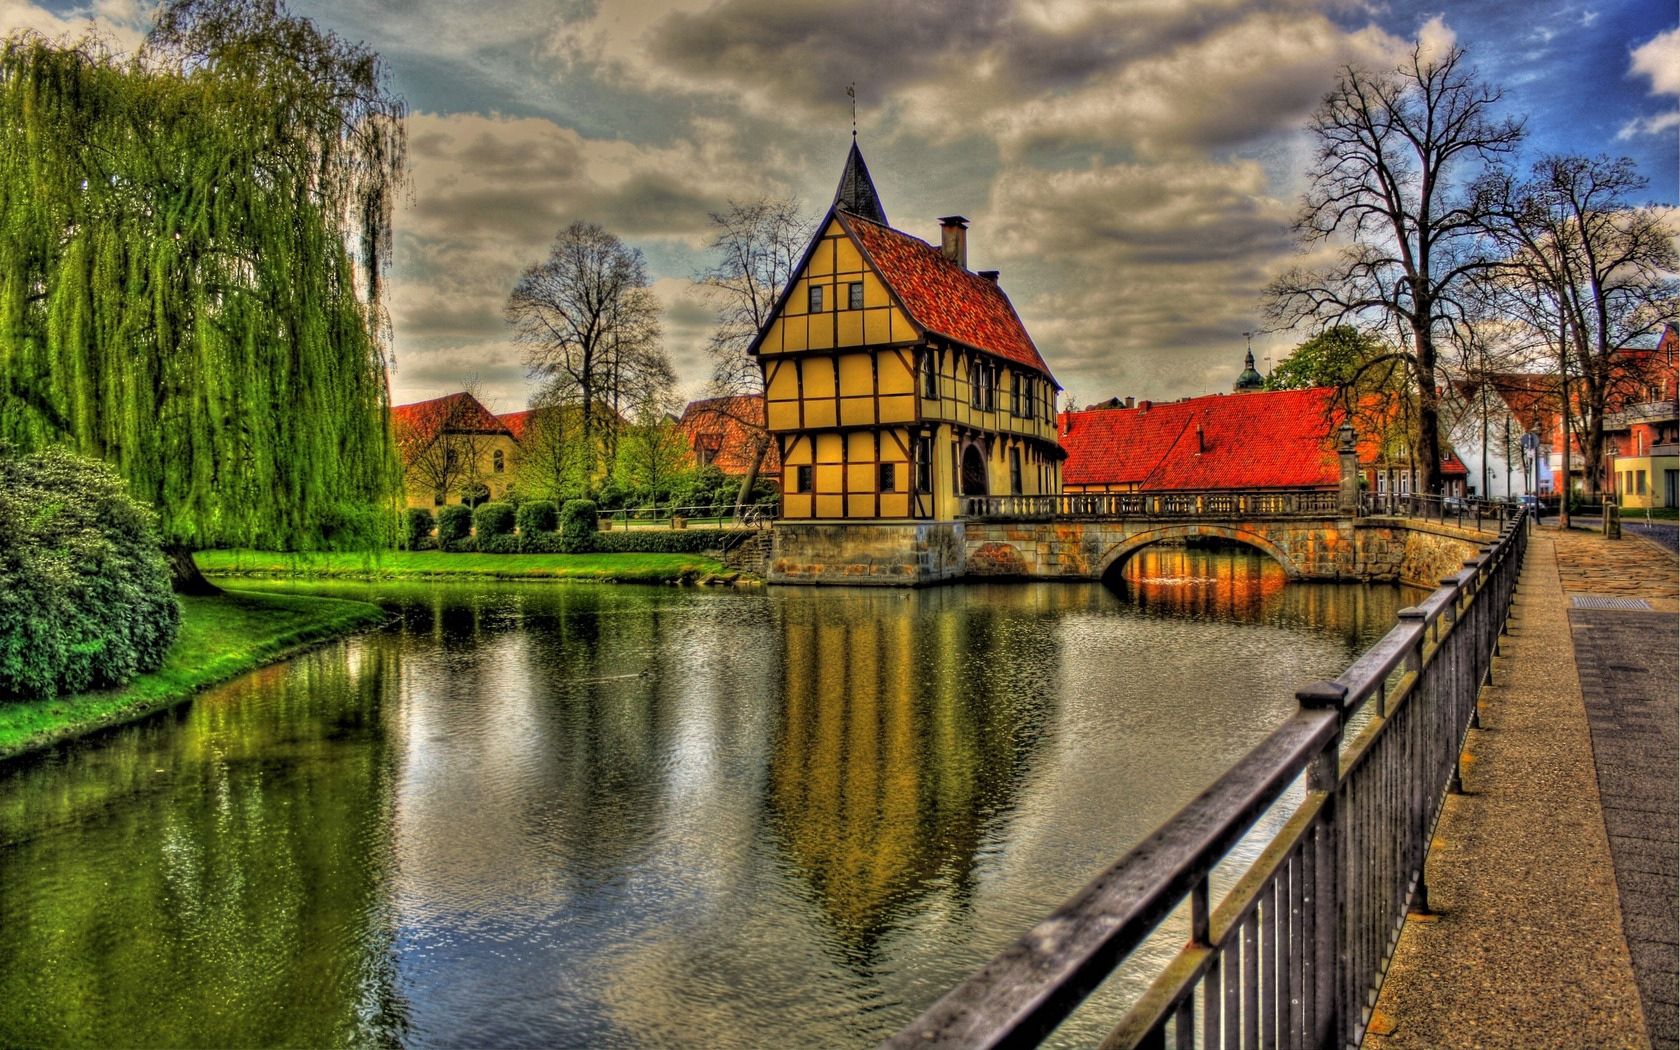 architecture, hdr, rivers, cities, green, water, houses, trees, grass, sky, clouds, city, reflection, road, beauty, house, bridge, colors, color, view, colorful, germany cellphone